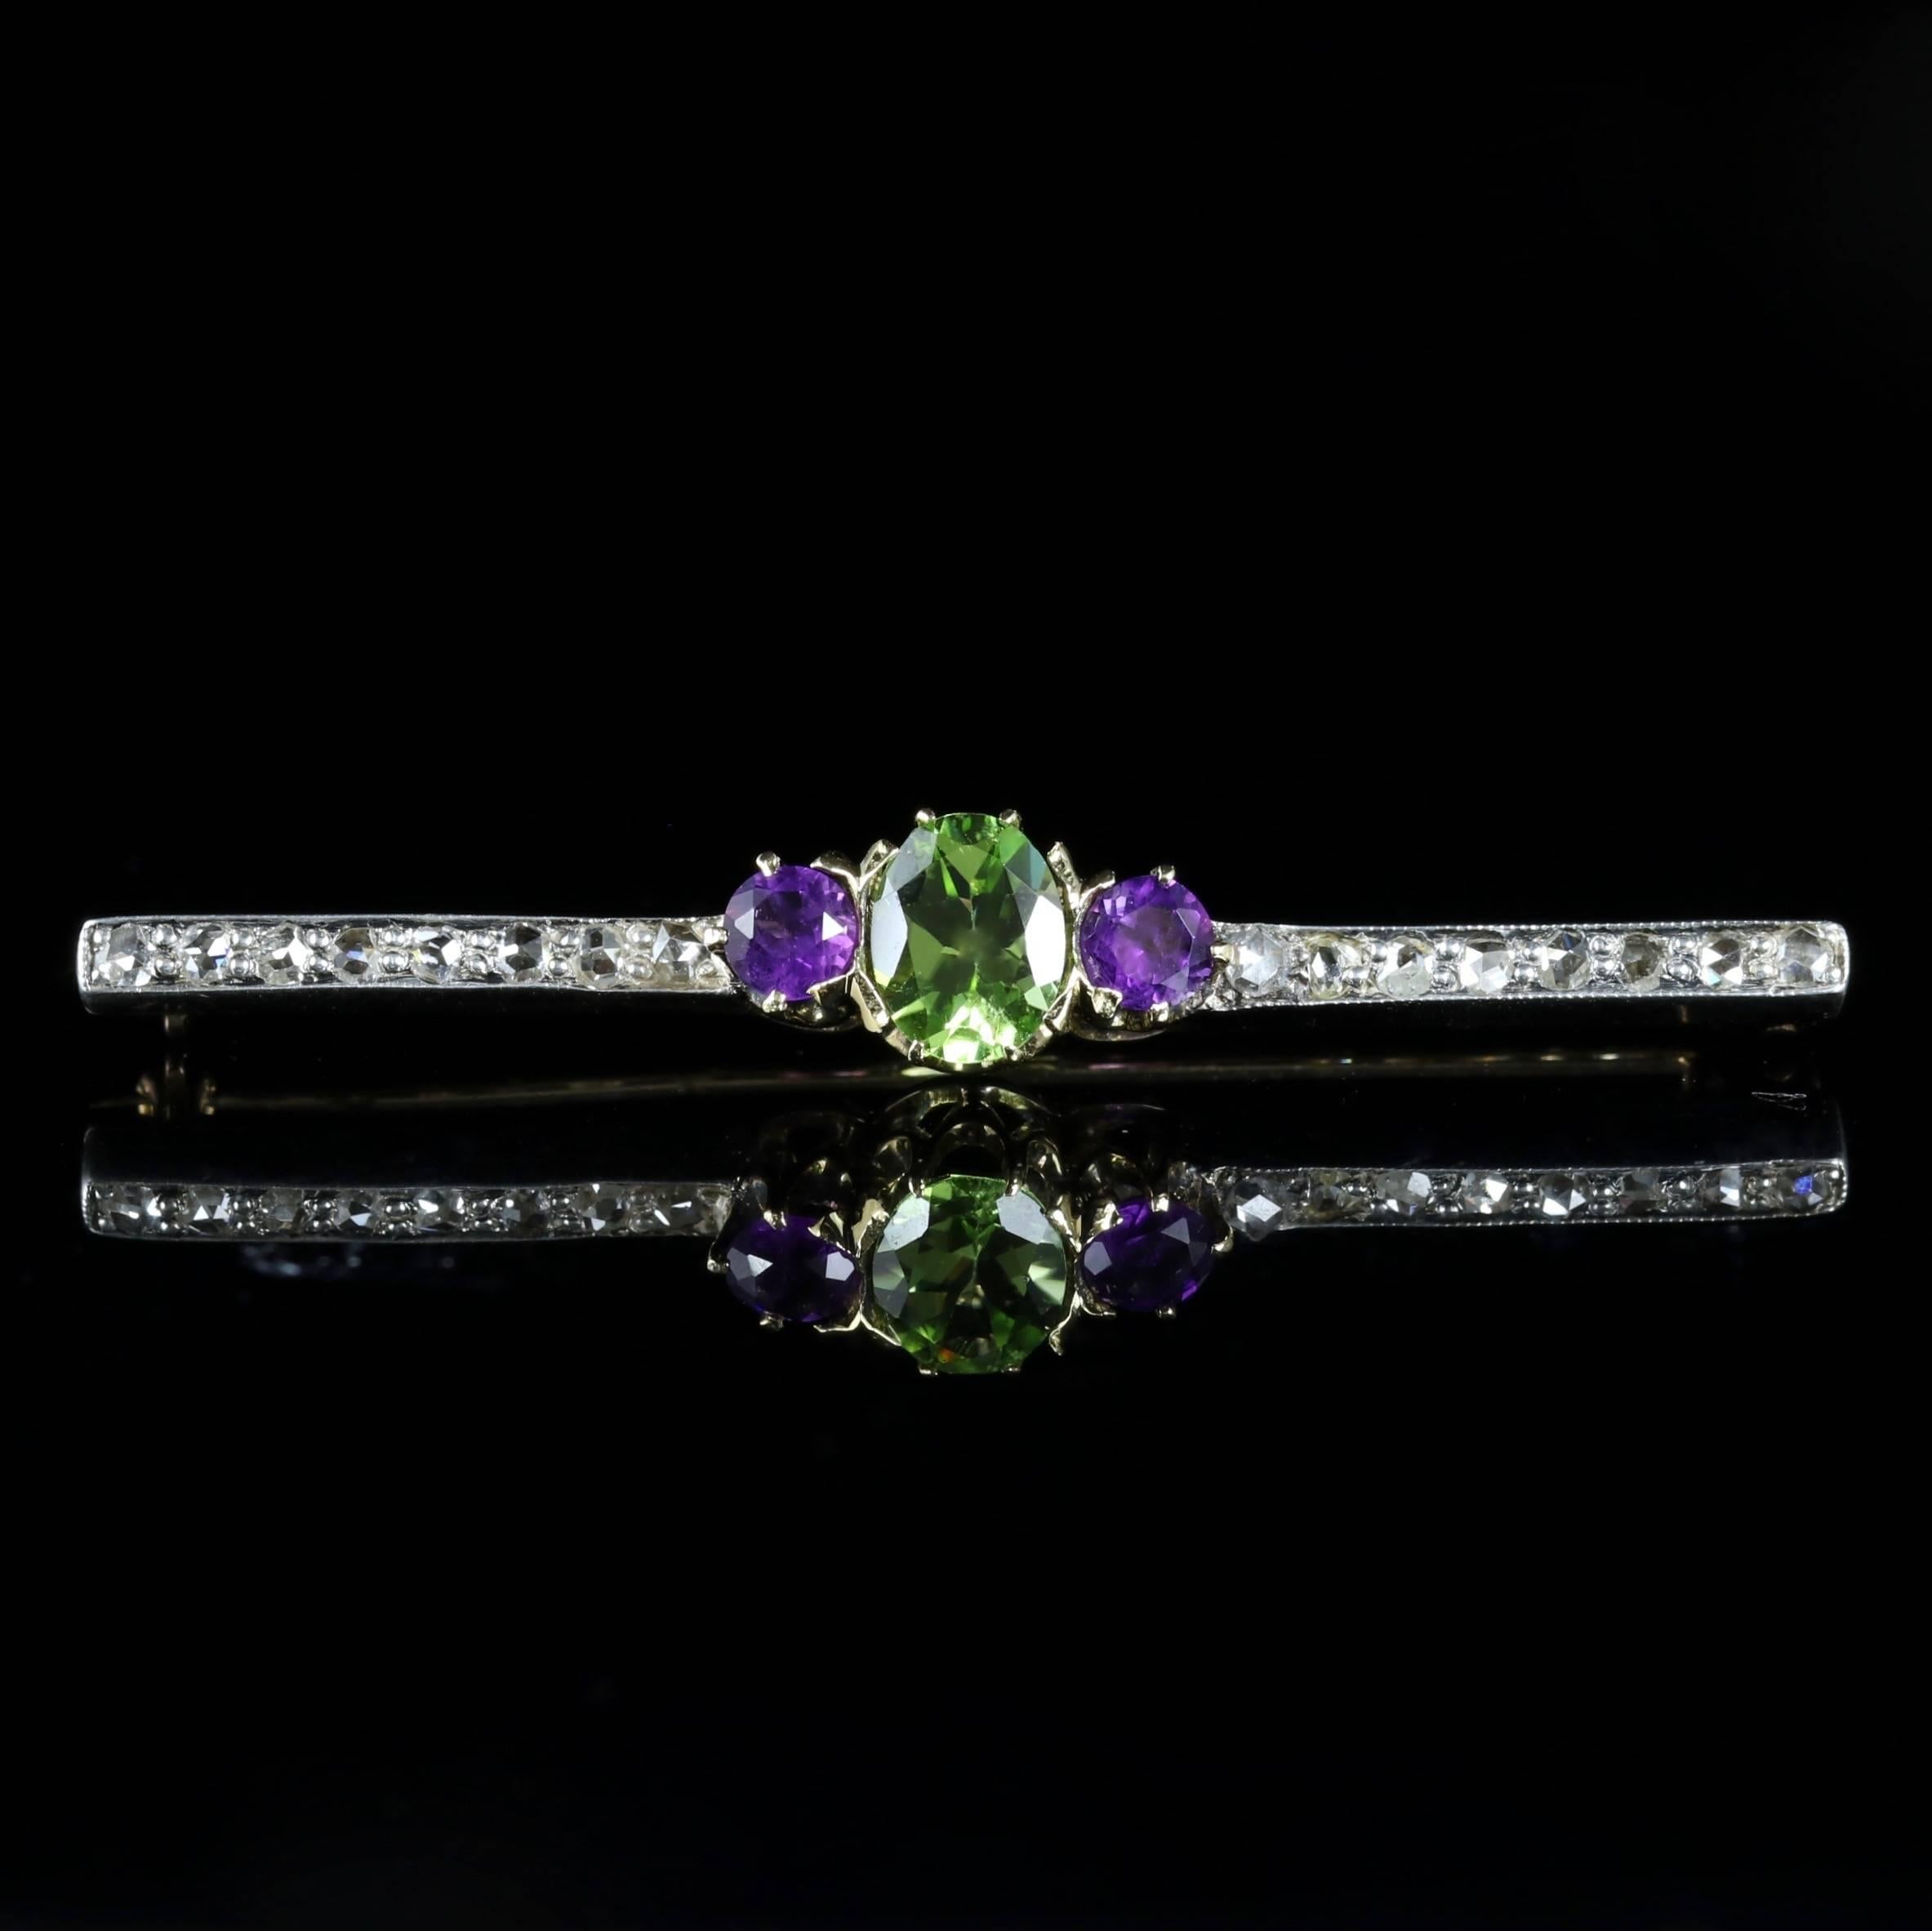 This beautiful Victorian Suffragette brooch is set in 18ct Yellow Gold. Circa 1900.

Set with a central rich green Peridot with one Amethyst at either side, which is then followed by glistening rose cut Diamonds.

Emmeline Pankhurst was the leader